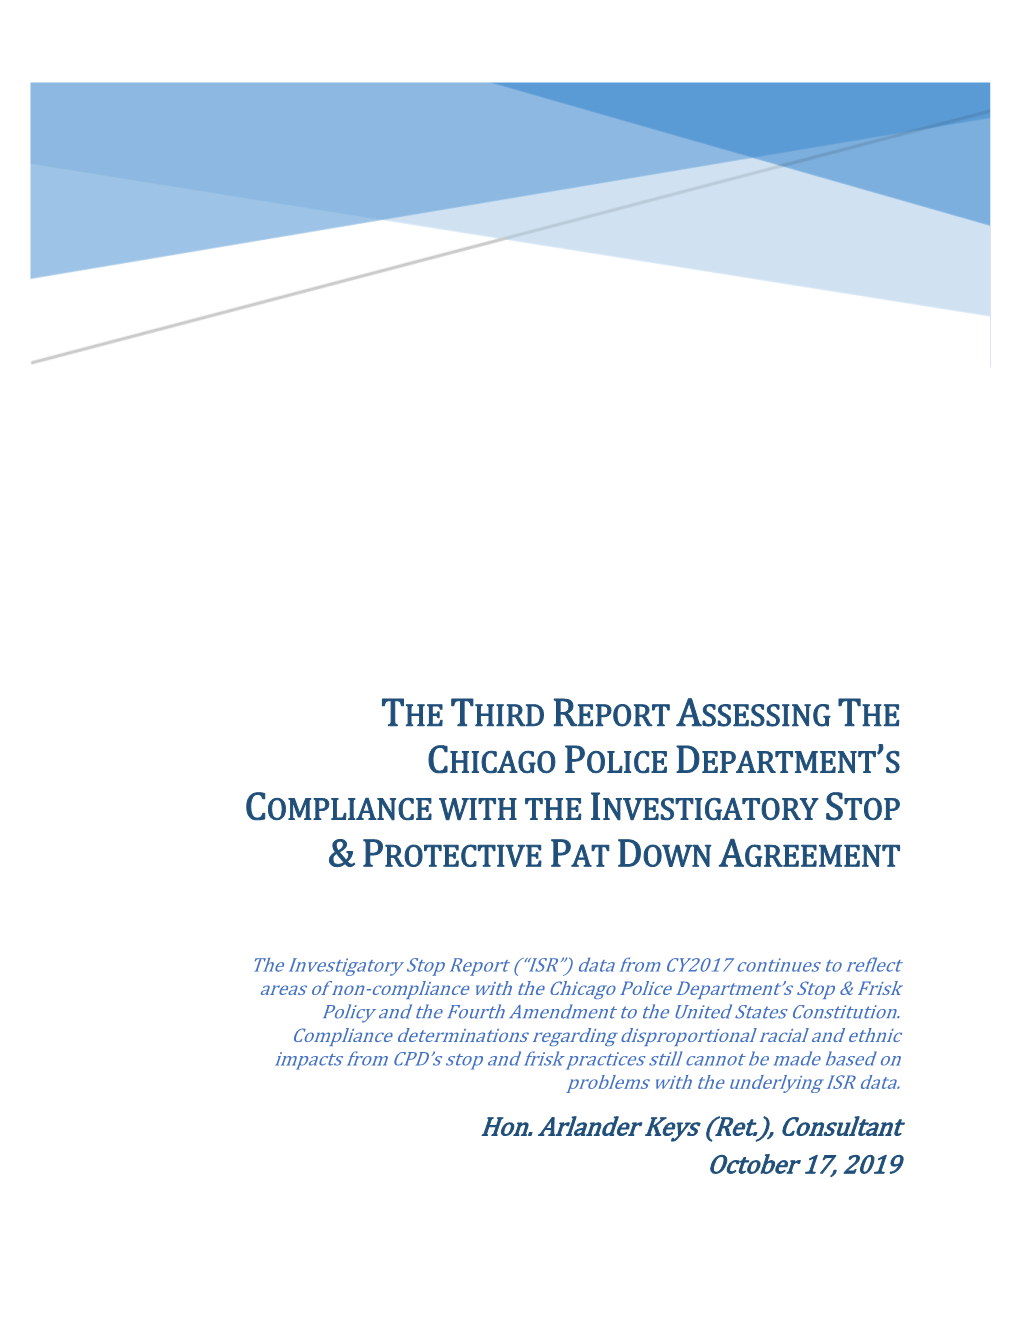 The Third Report Assessing the Chicago Police Department's Compliance with the Investigatory Stop &Protective Pat Down